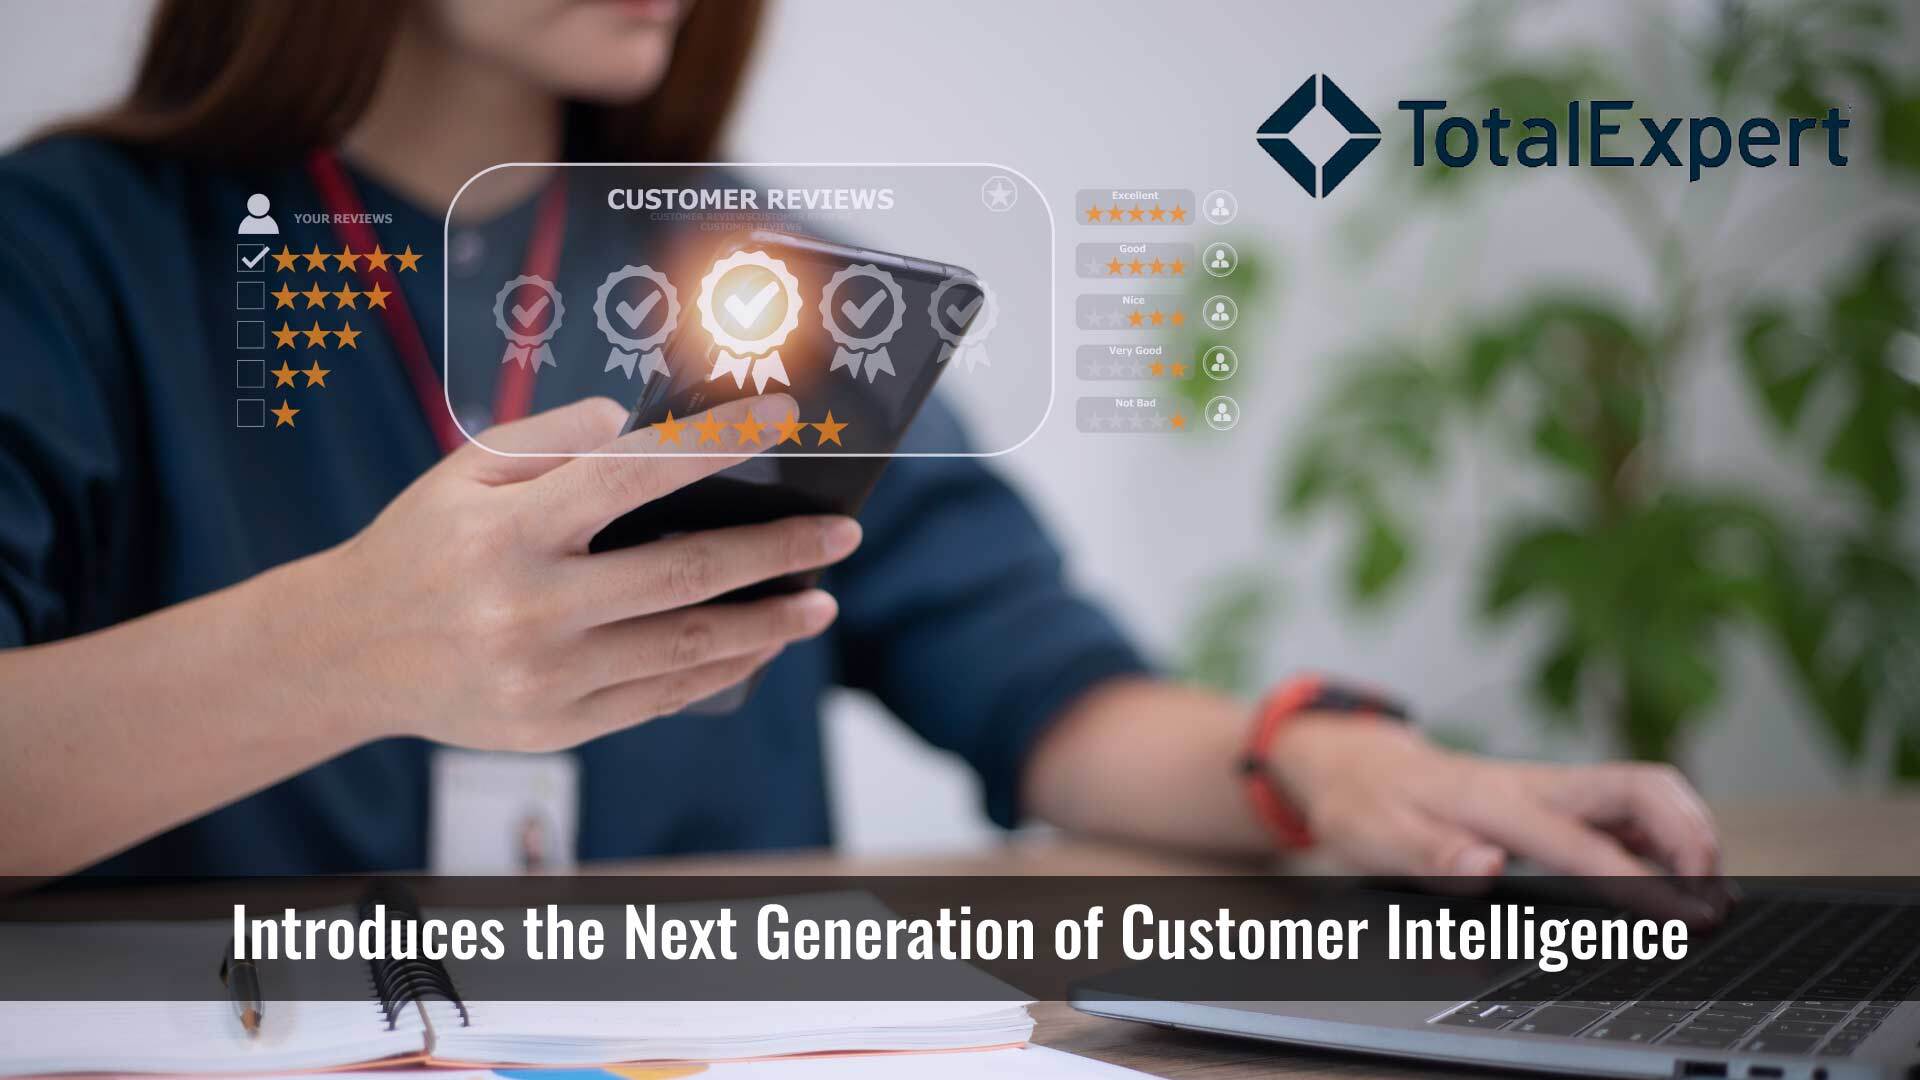 Total Expert Introduces the Next Generation of Customer Intelligence